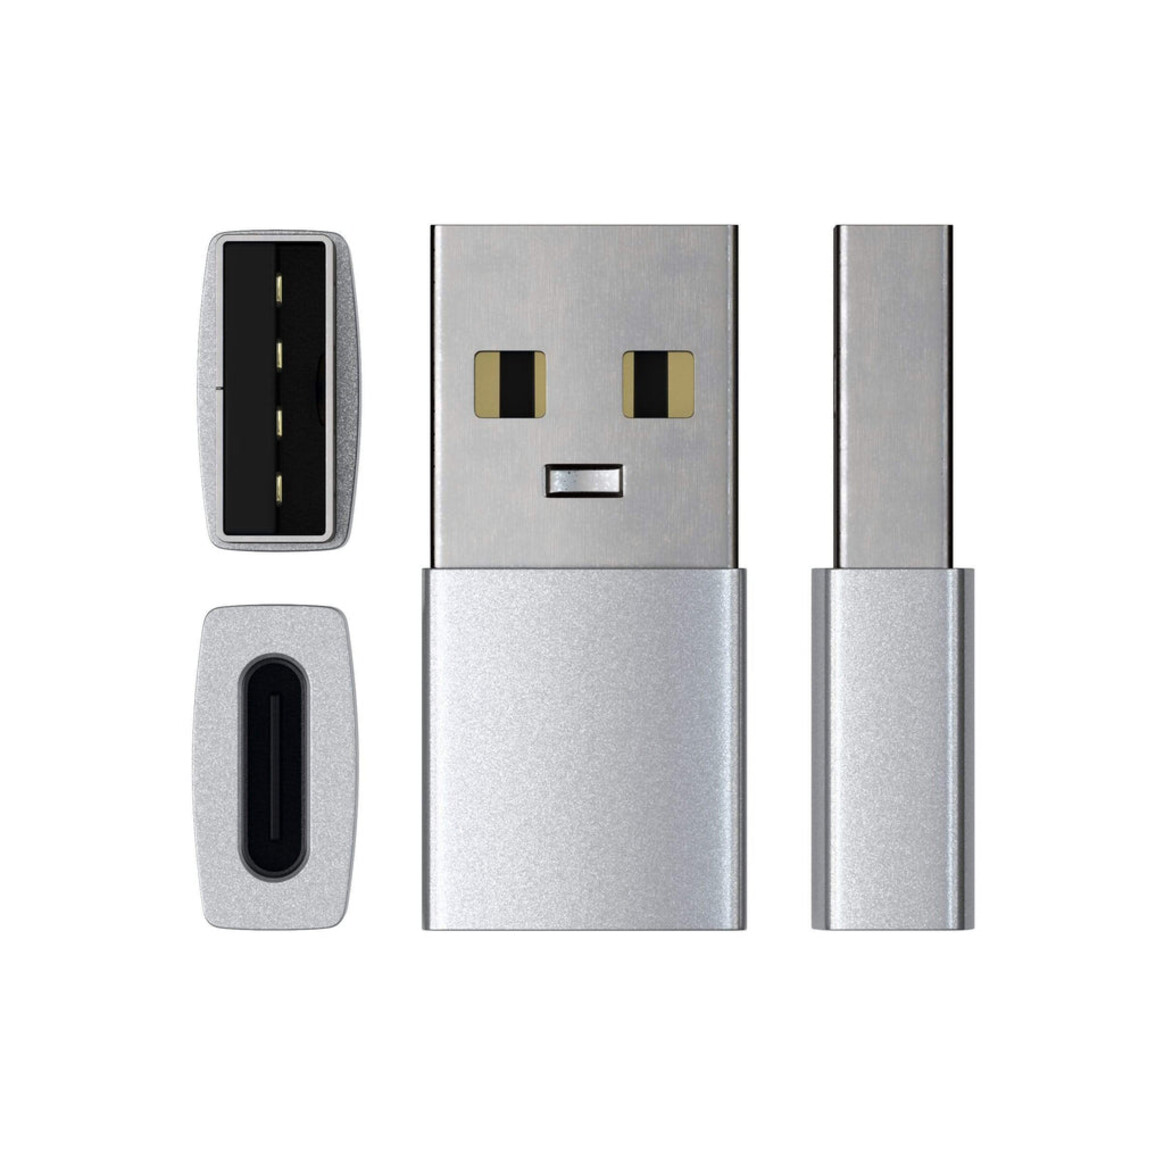 <h1 style="text-align: center;">Satechi Type-C Type A USB Adapter Silver</h1>